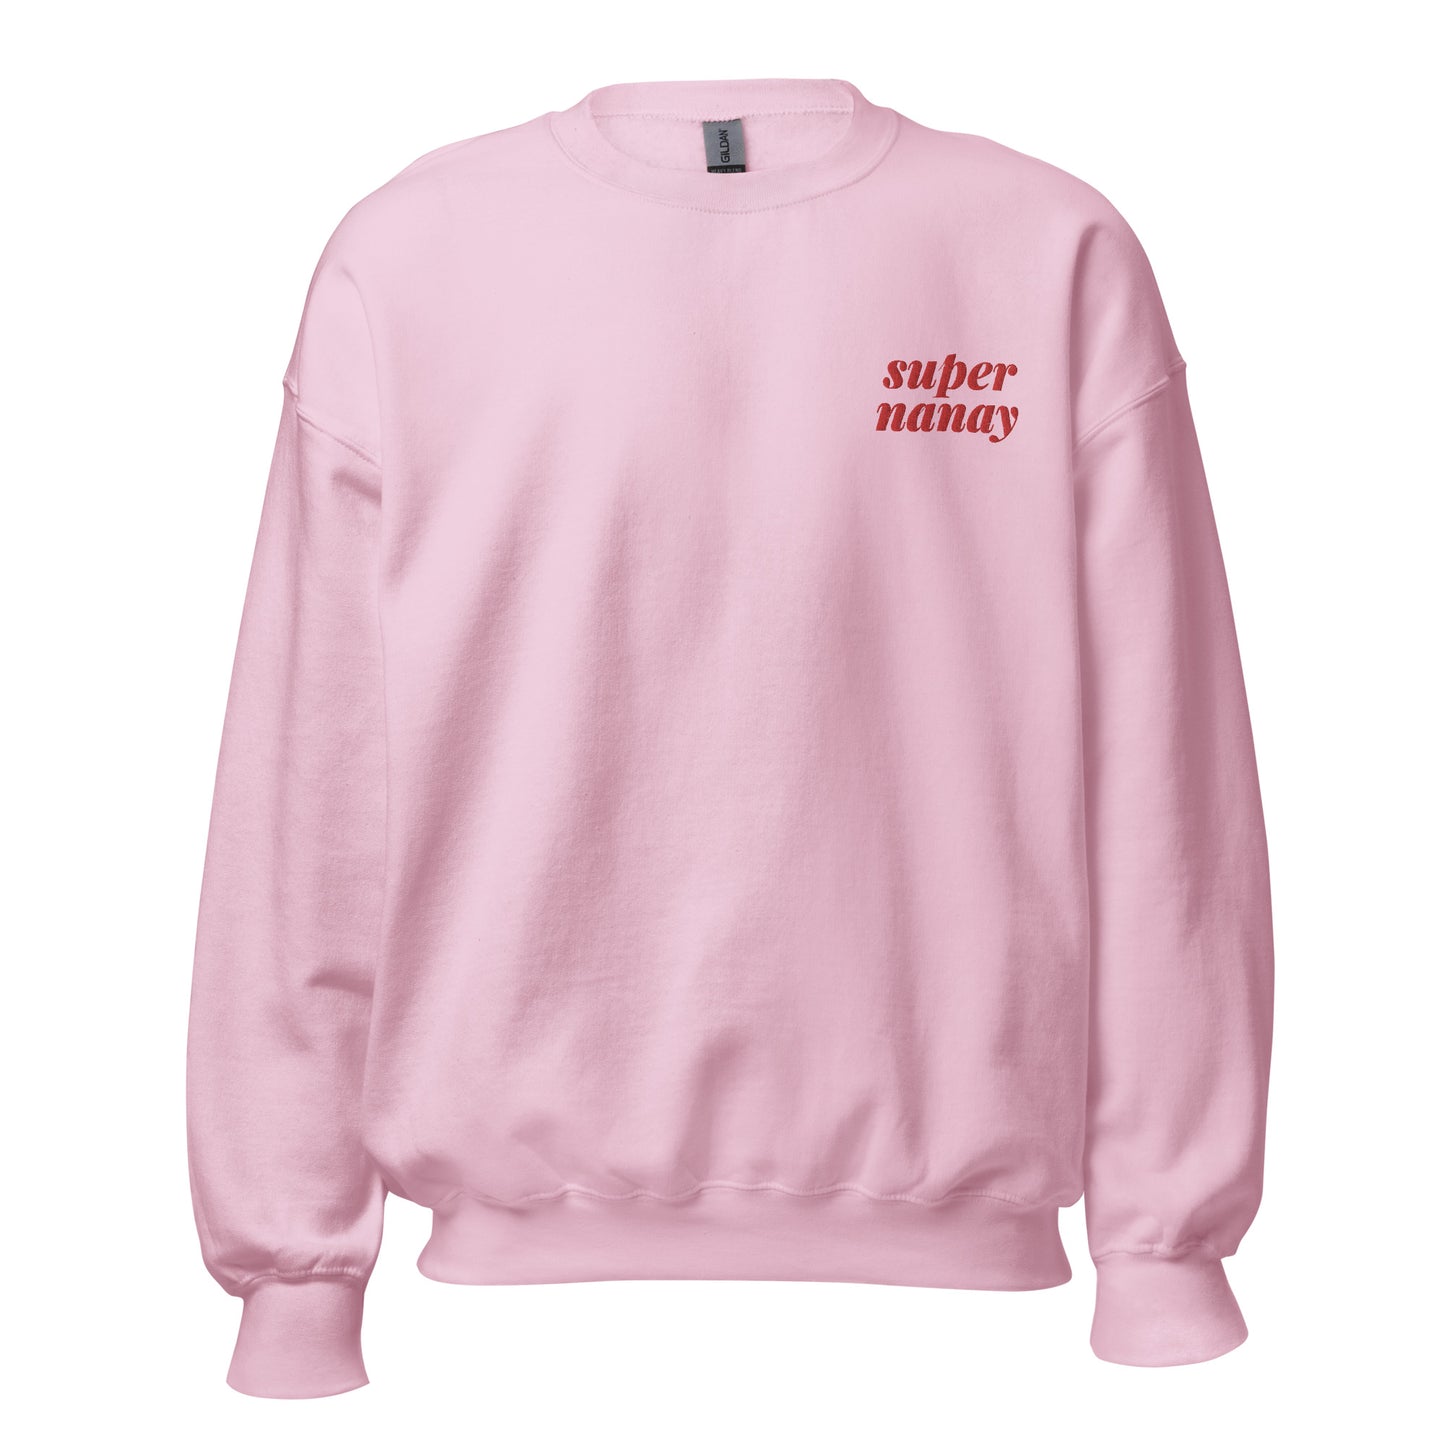 Filipino Sweatshirt Crew Neck Super Nanay Best Mom Embroidered Mother's Day Gift in color variant Light Pink